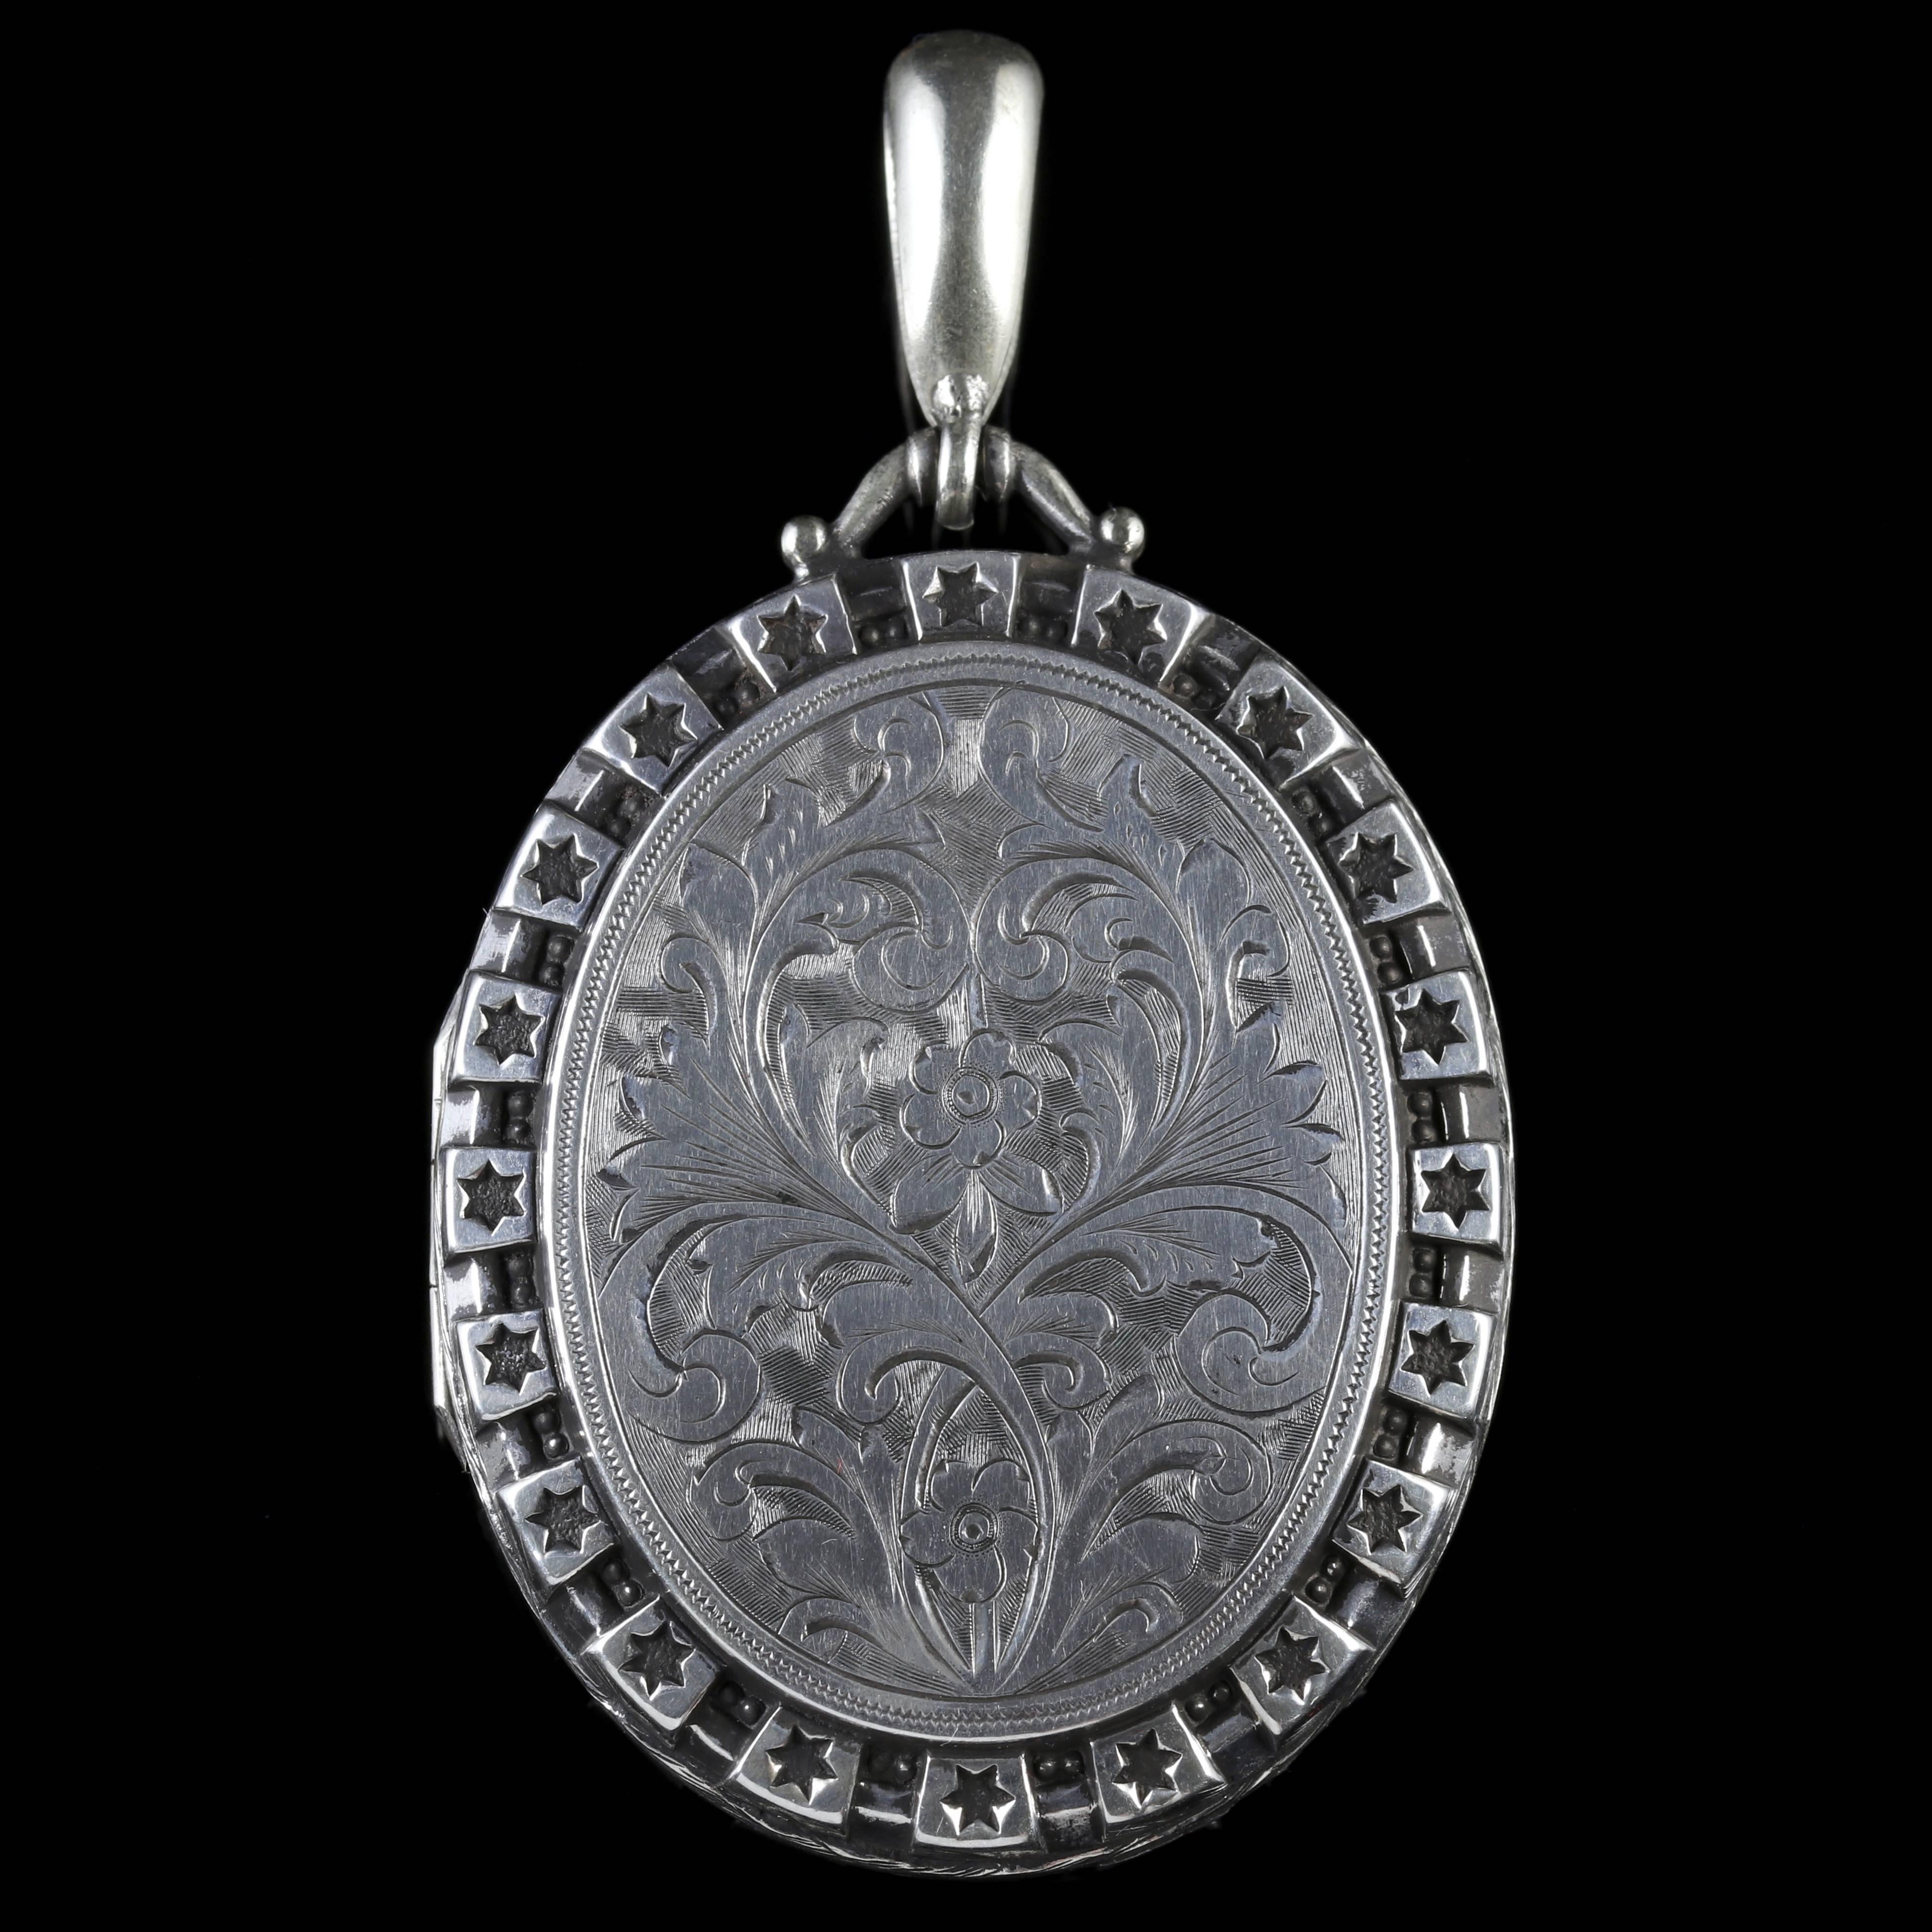 This wonderful Sterling Silver Victorian Collar and Locket is Circa 1880. 

Each link of the Collar boasts beautiful floral engravings leading to a lovely large locket.

The locket is double sided with lovely Victorian engraving on both sides